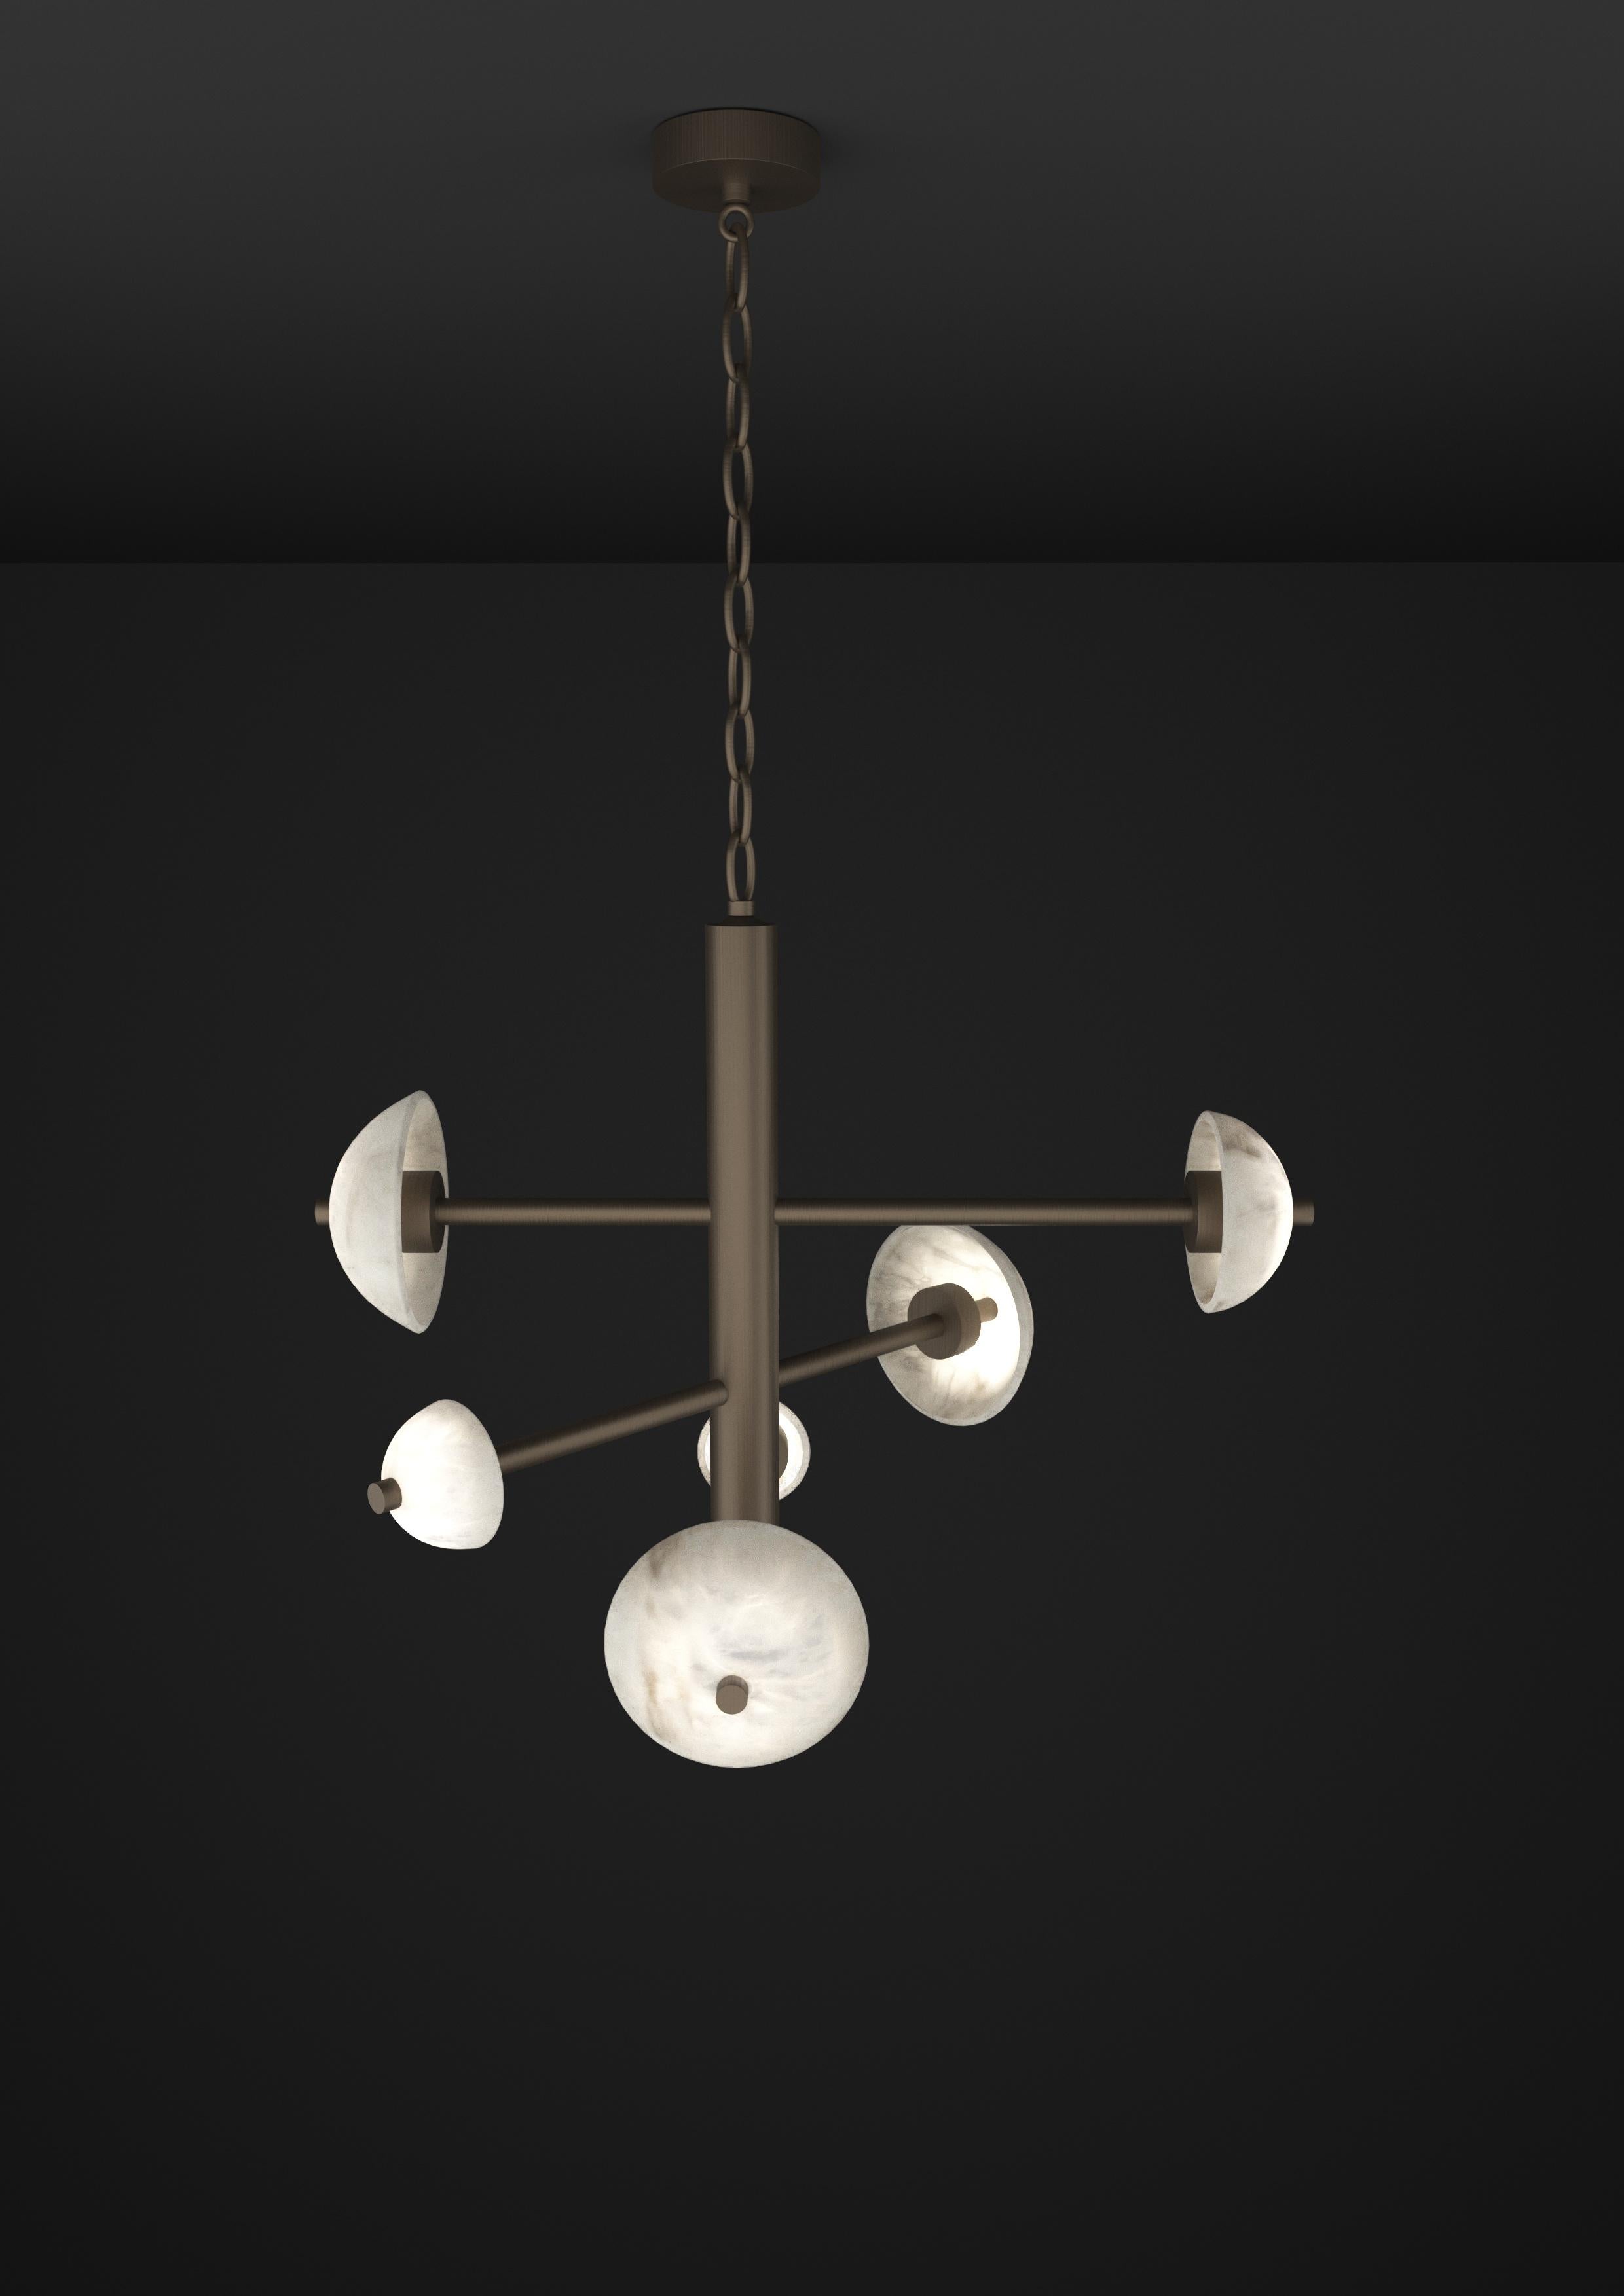 Apollo Brushed Burnished Metal Pendant Lamp by Alabastro Italiano
Dimensions: D 70,5 x W 54 x H 64 cm.
Materials: White alabaster and metal.

Available in different finishes: Shiny Silver, Bronze, Brushed Brass, Ruggine of Florence, Brushed